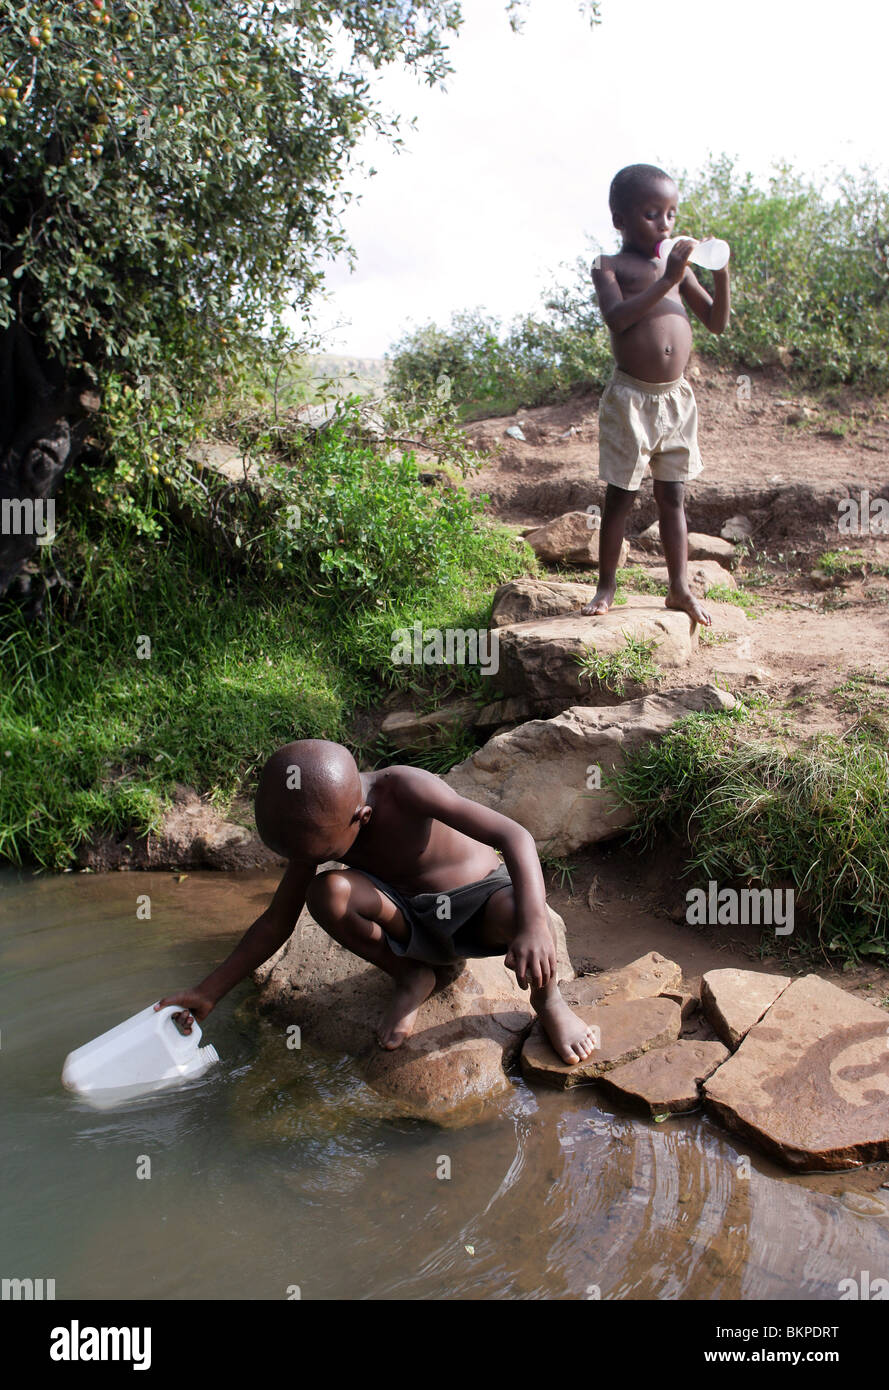 Lesotho: boy fetching water from a well Stock Photo